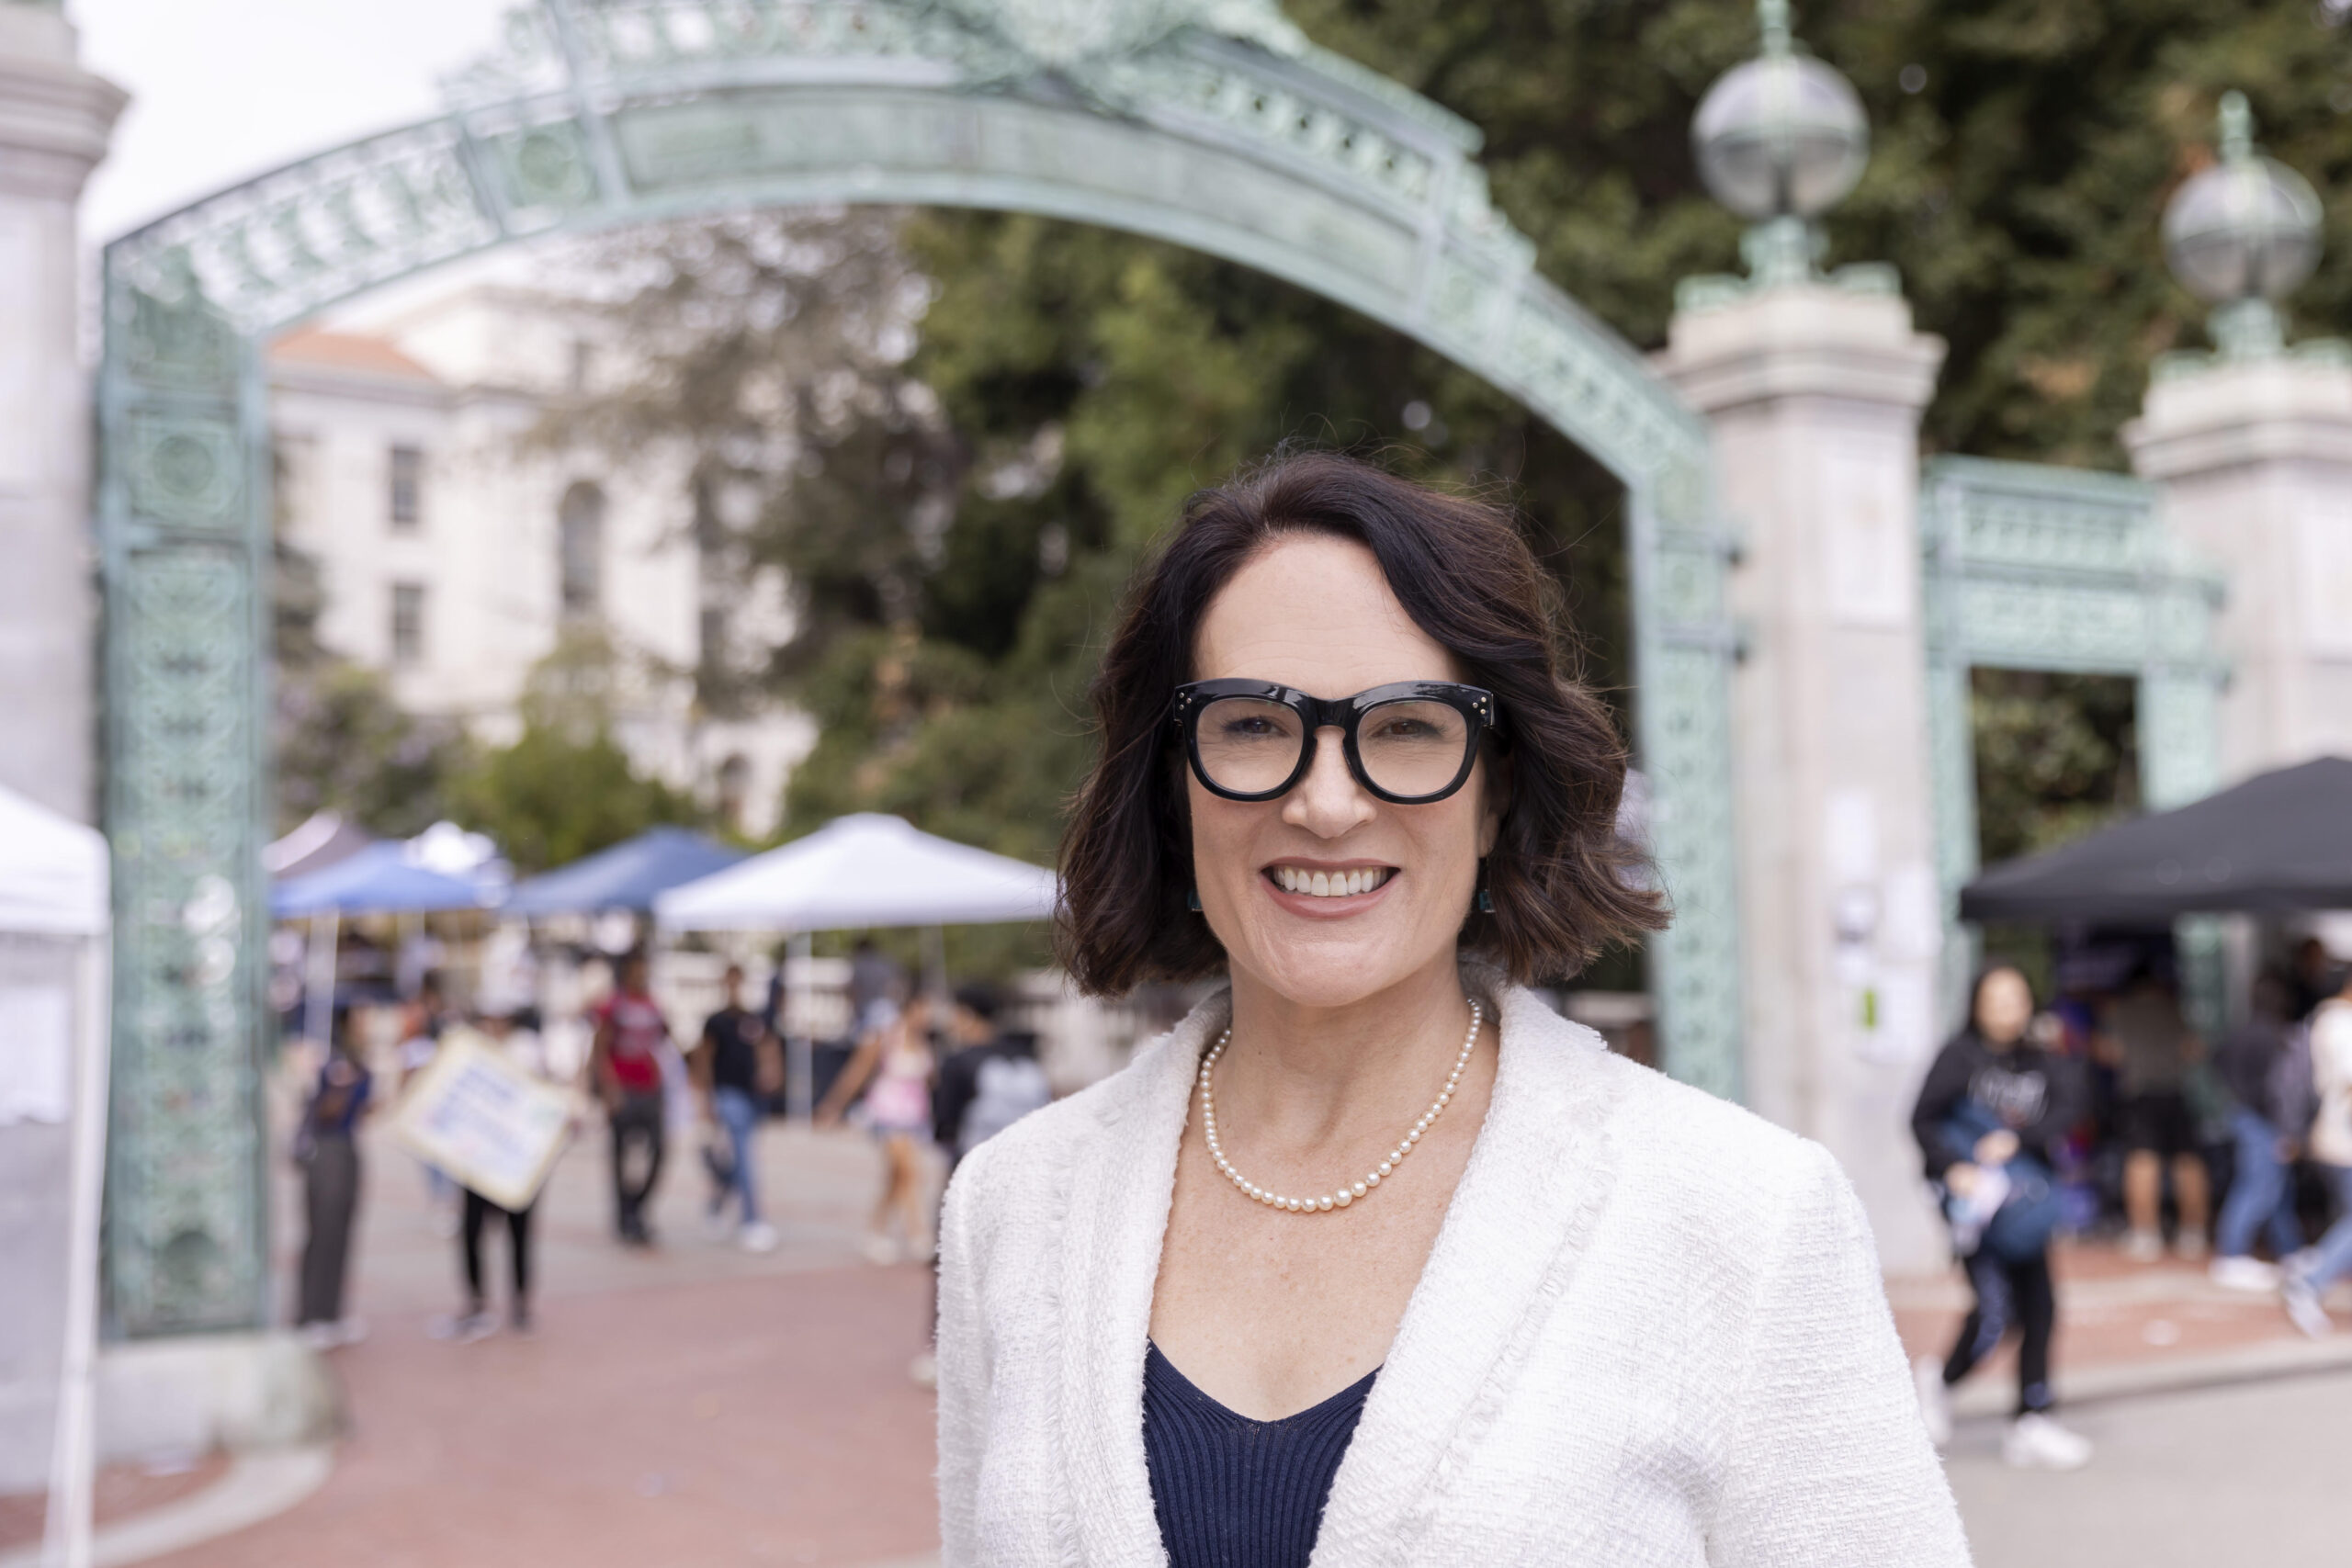 Wendy Hillis wearing black glasses and a white suit stands in front of Sather gate.